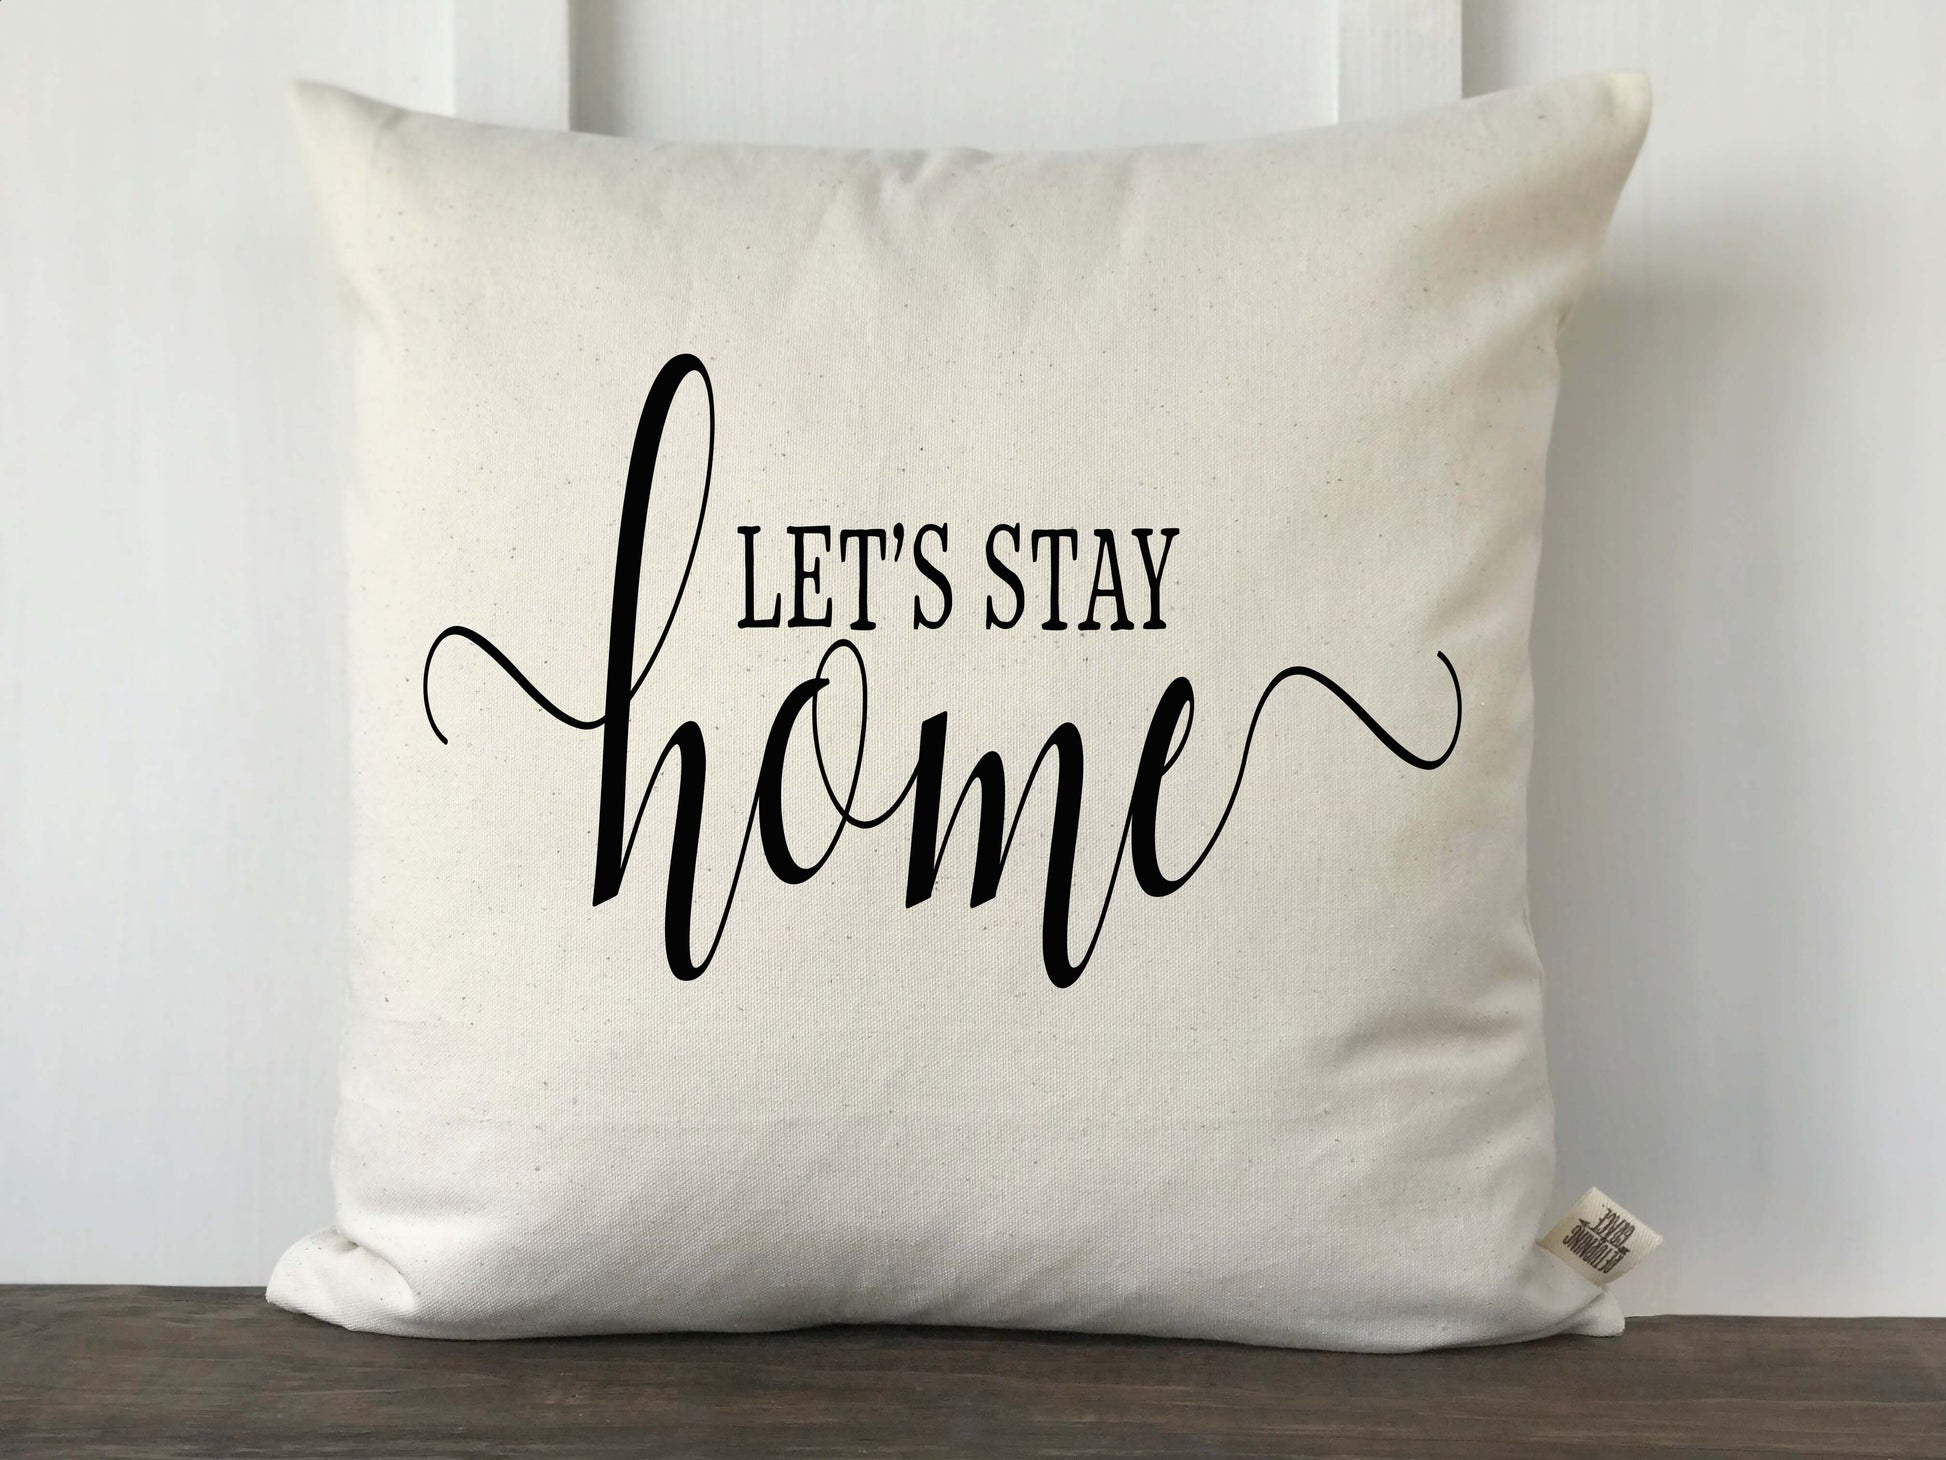 Let's Stay Home Pillow Cover - Returning Grace Designs